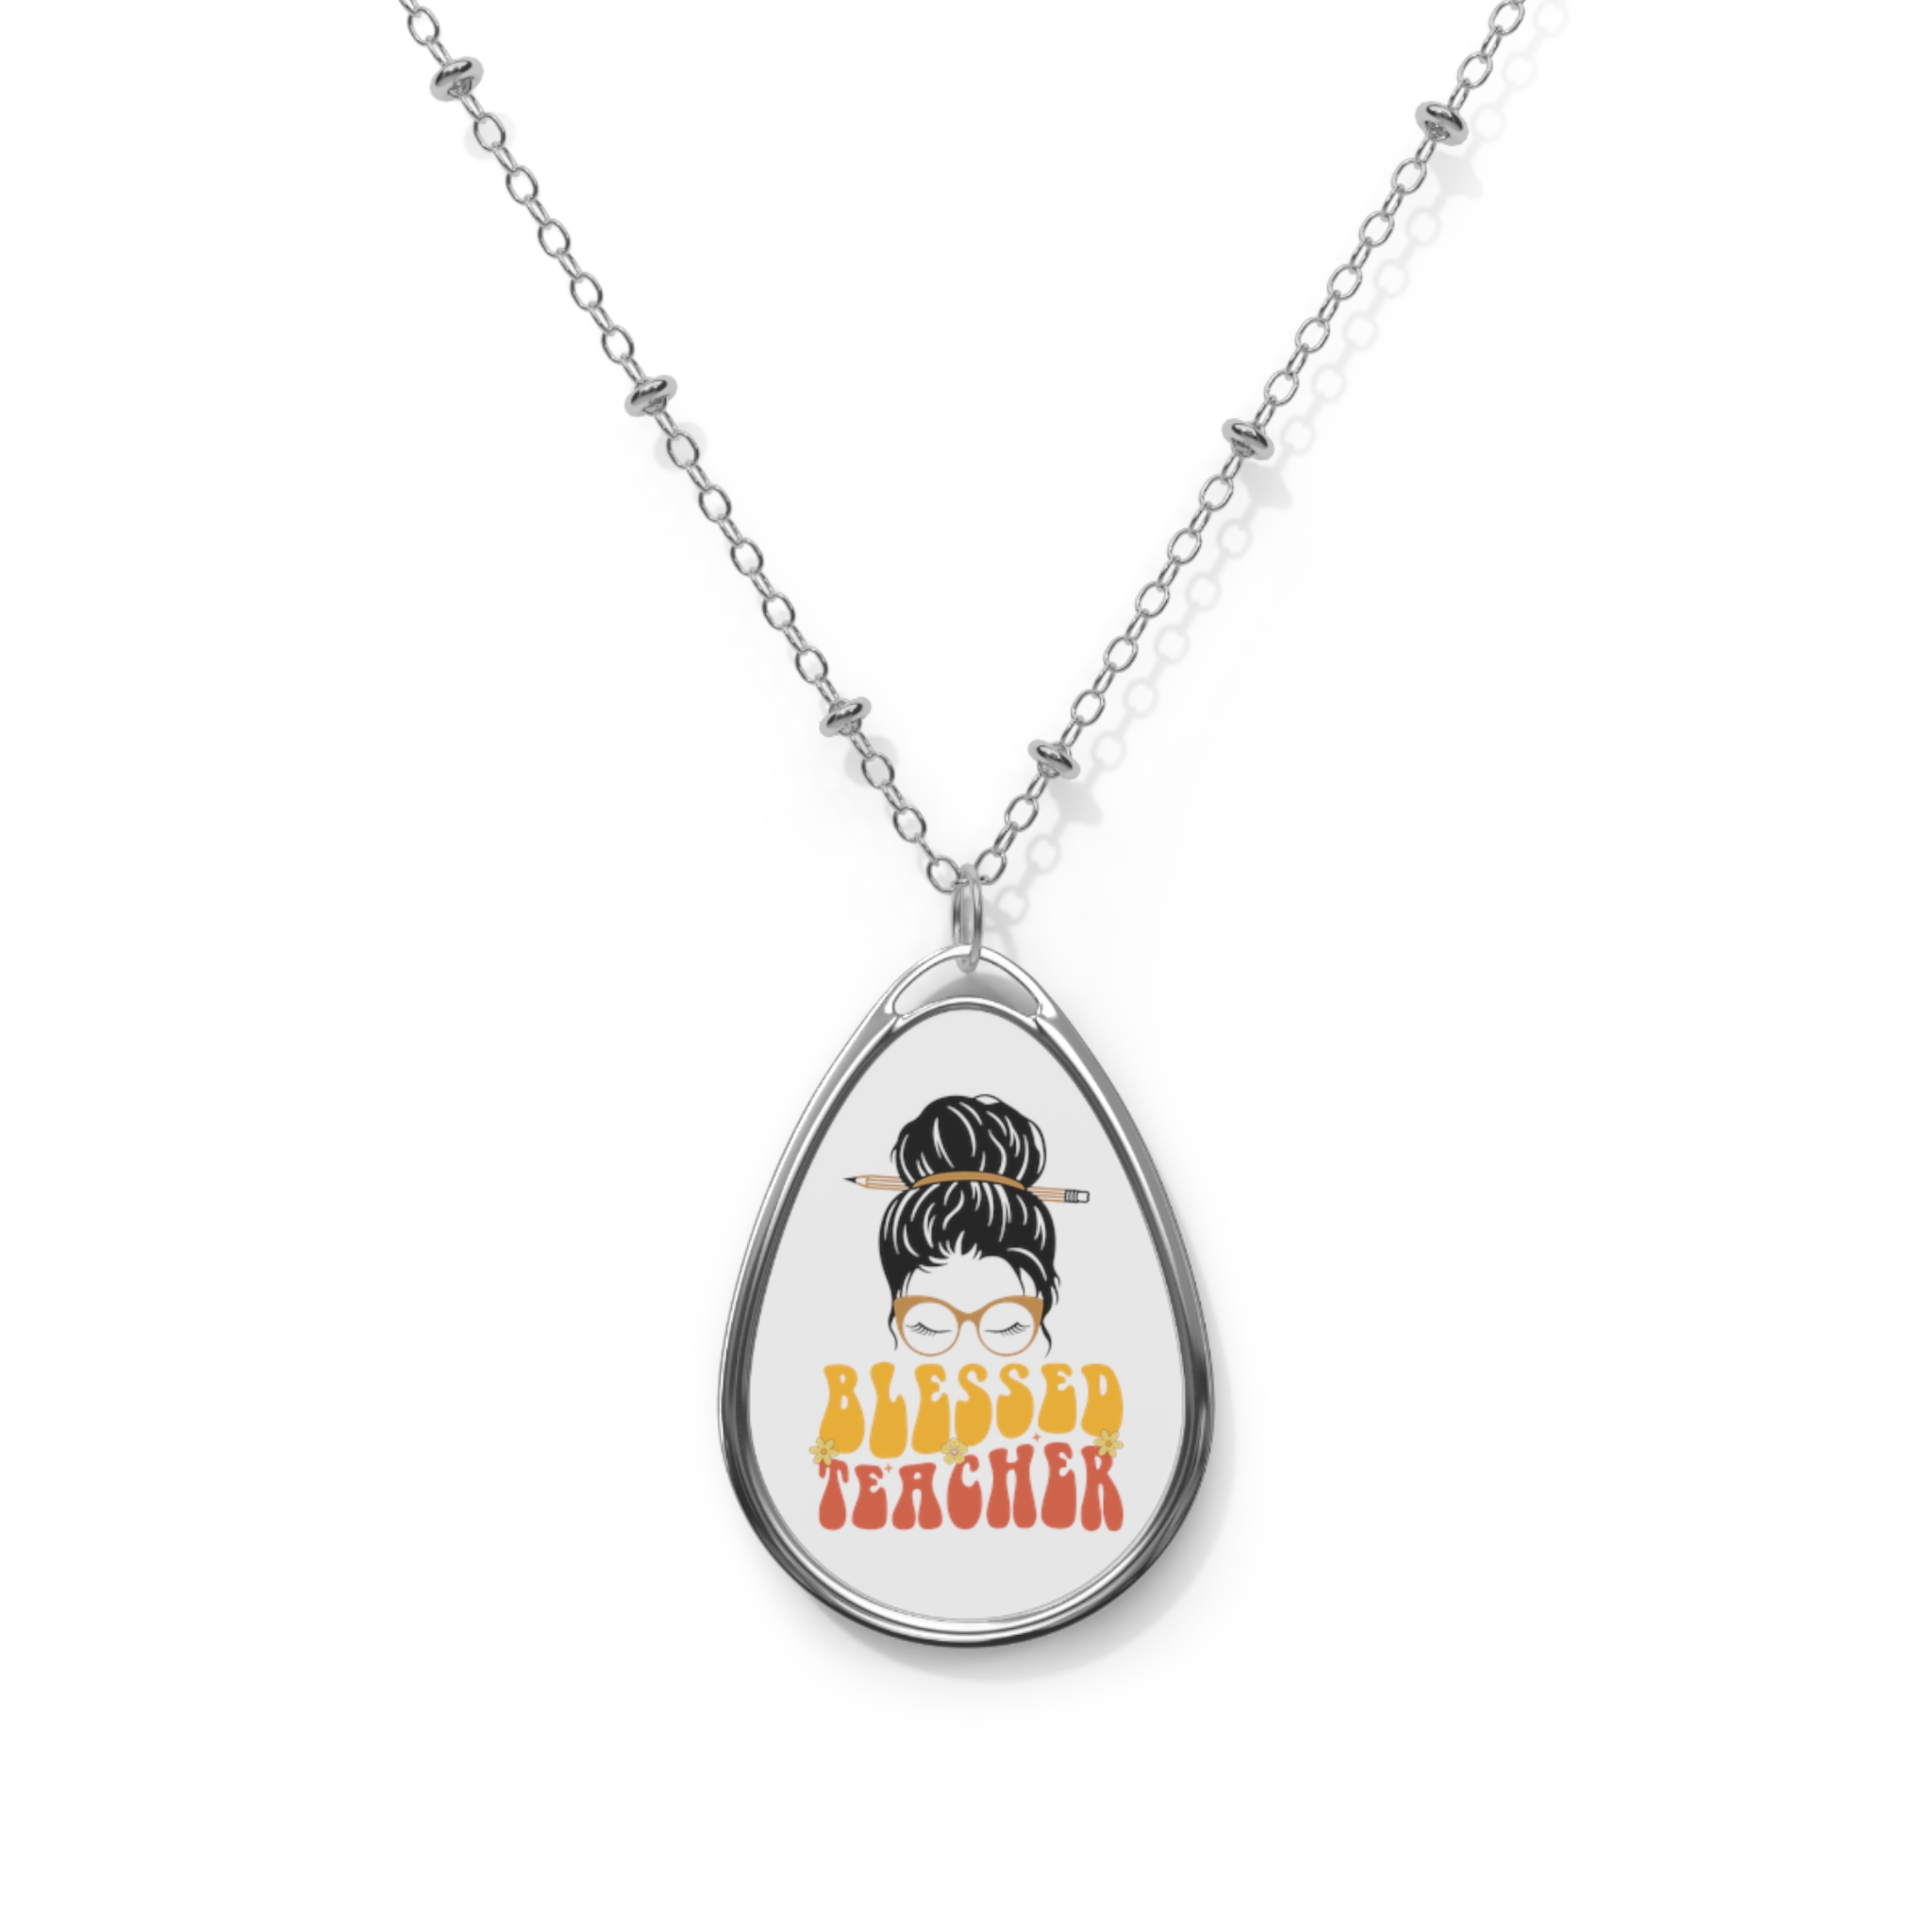 Oval Necklace- Blessed Teacher